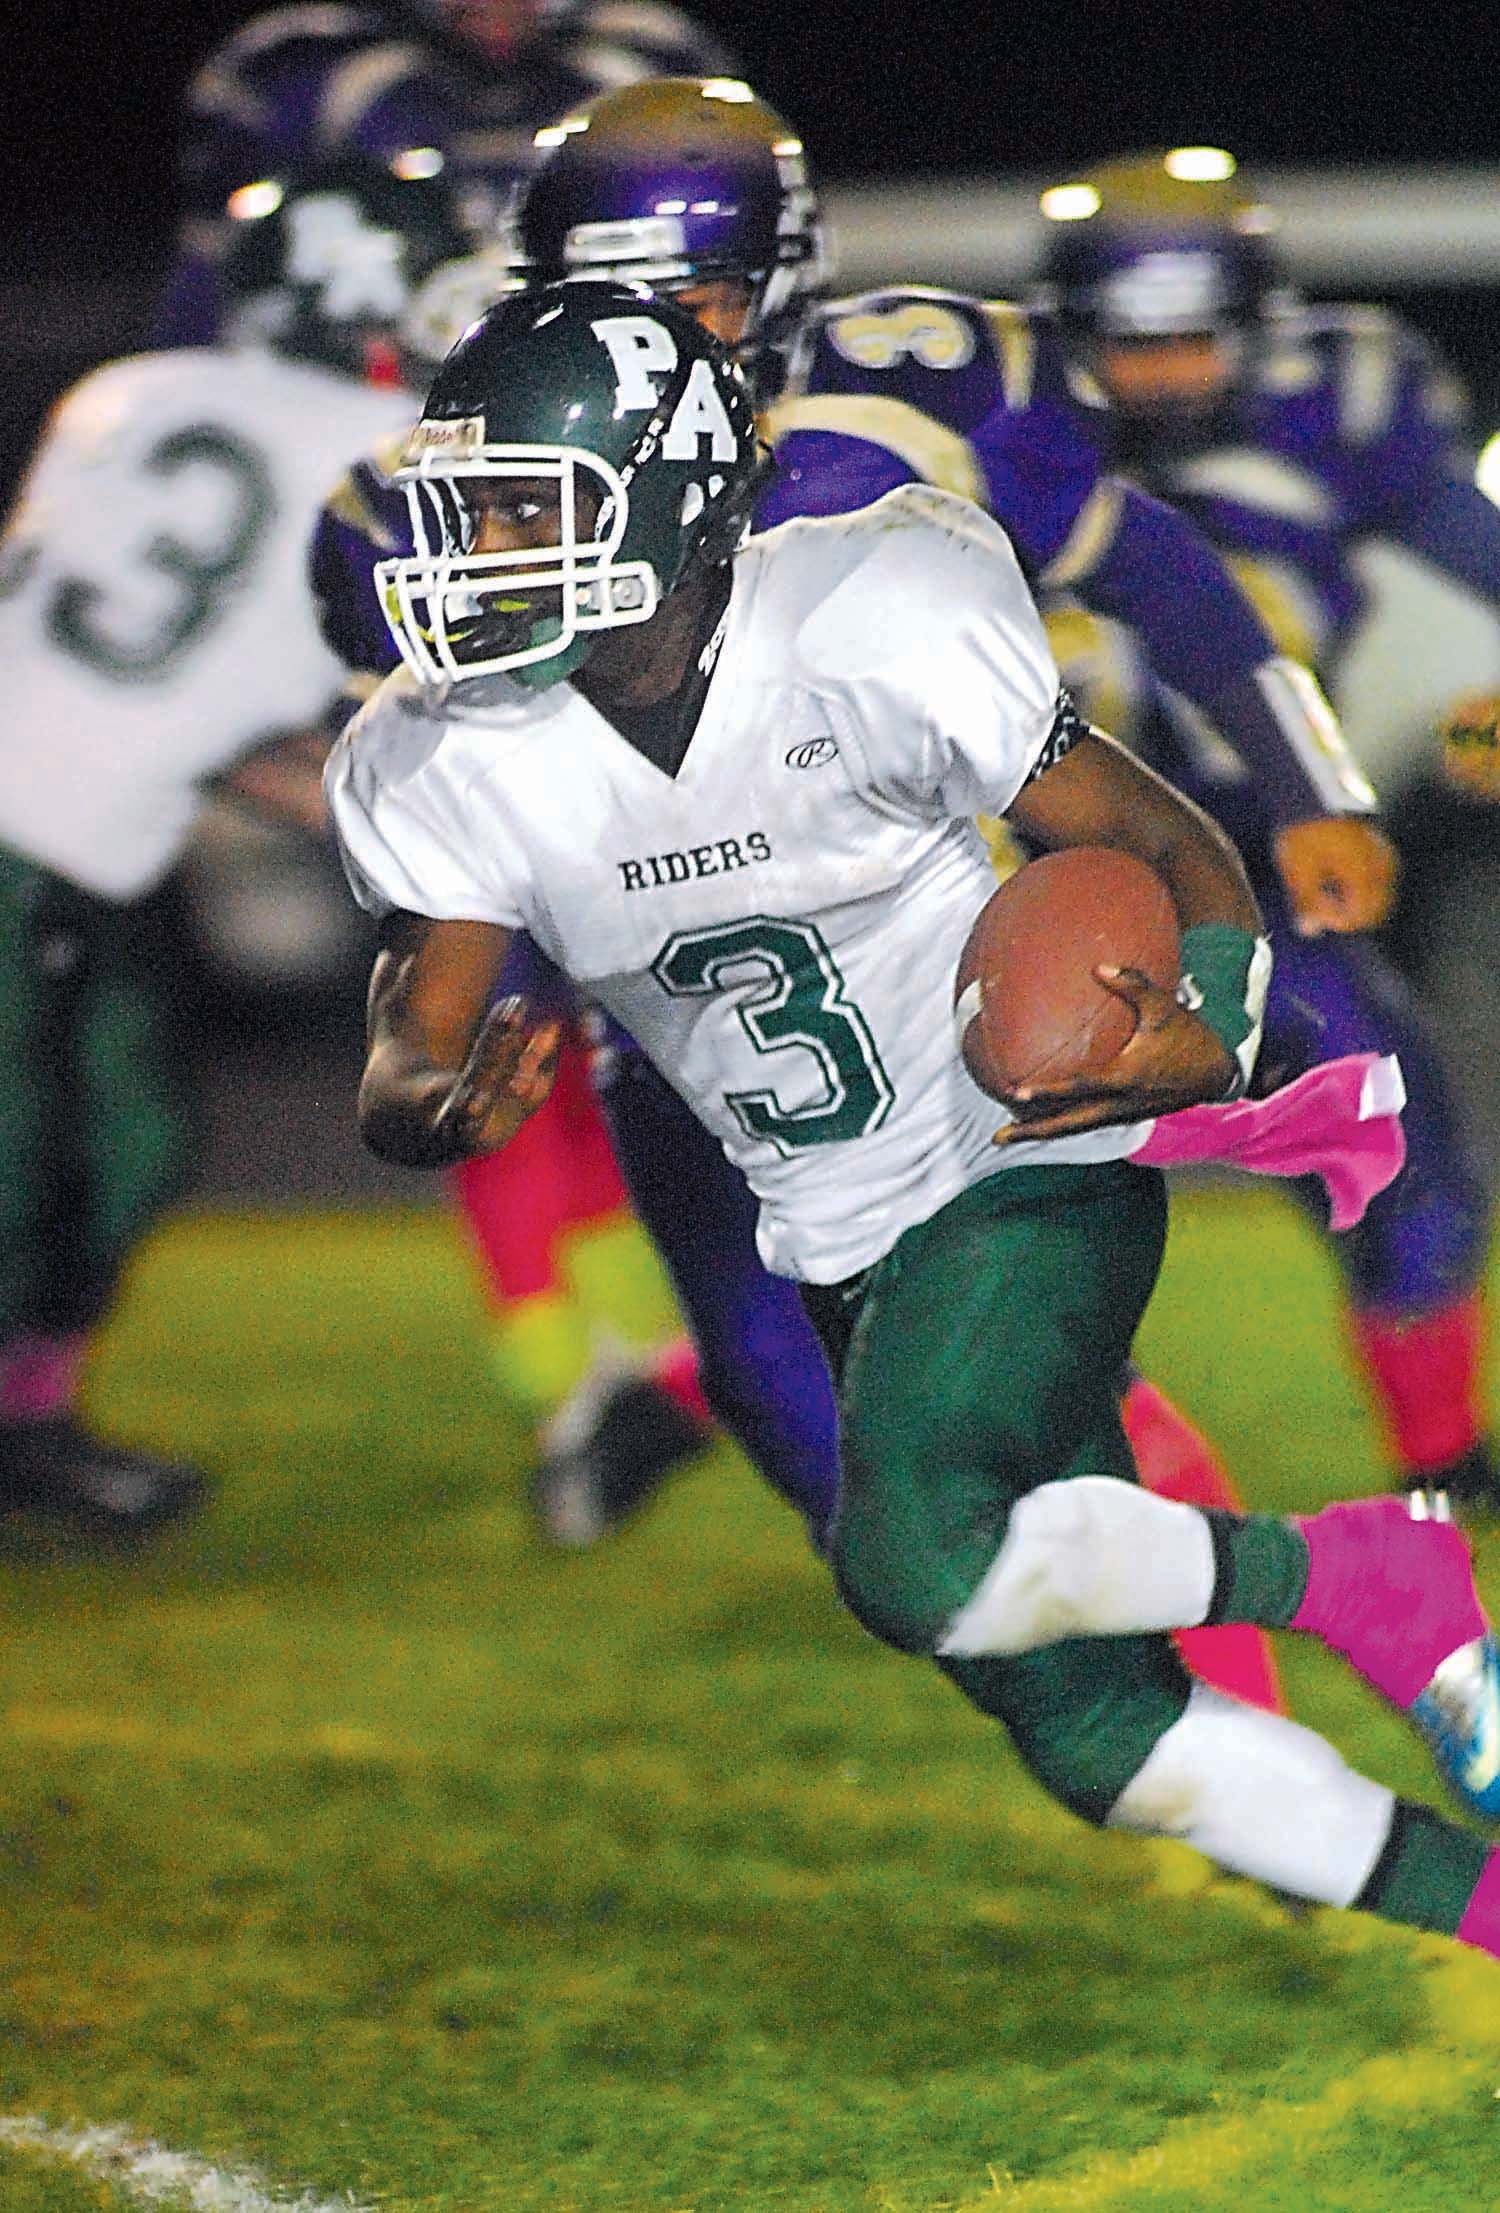 Port Angeles' Miki Andrus rushes upfield against Sequim. Andrus scored two touchdowns to help the Roughriders defeat their rivals 37-21. Keith Thorpe/Peninsula Daily News